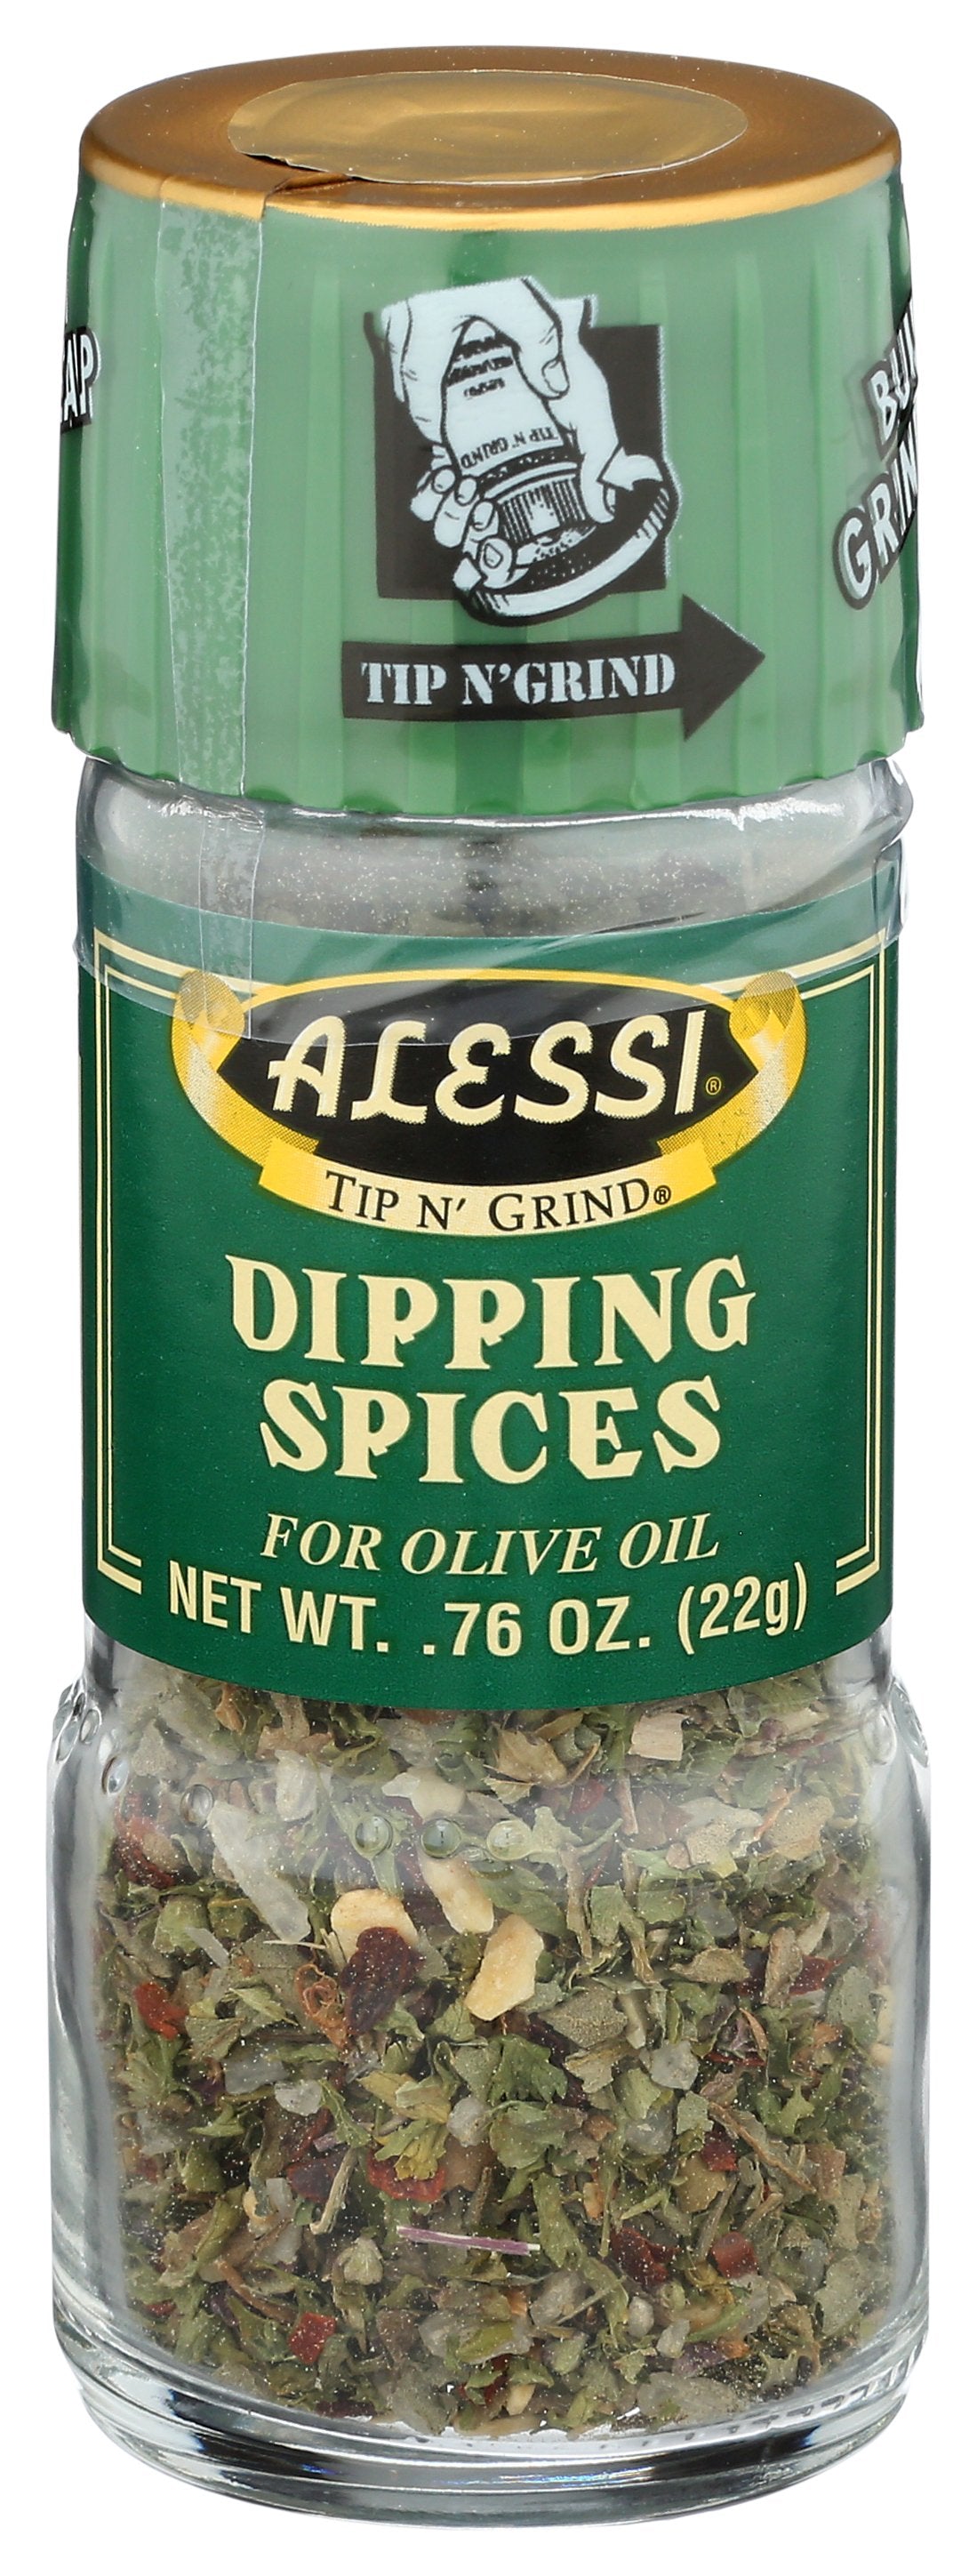 ALESSI GRINDER DIPPING SPICES - Case of 6